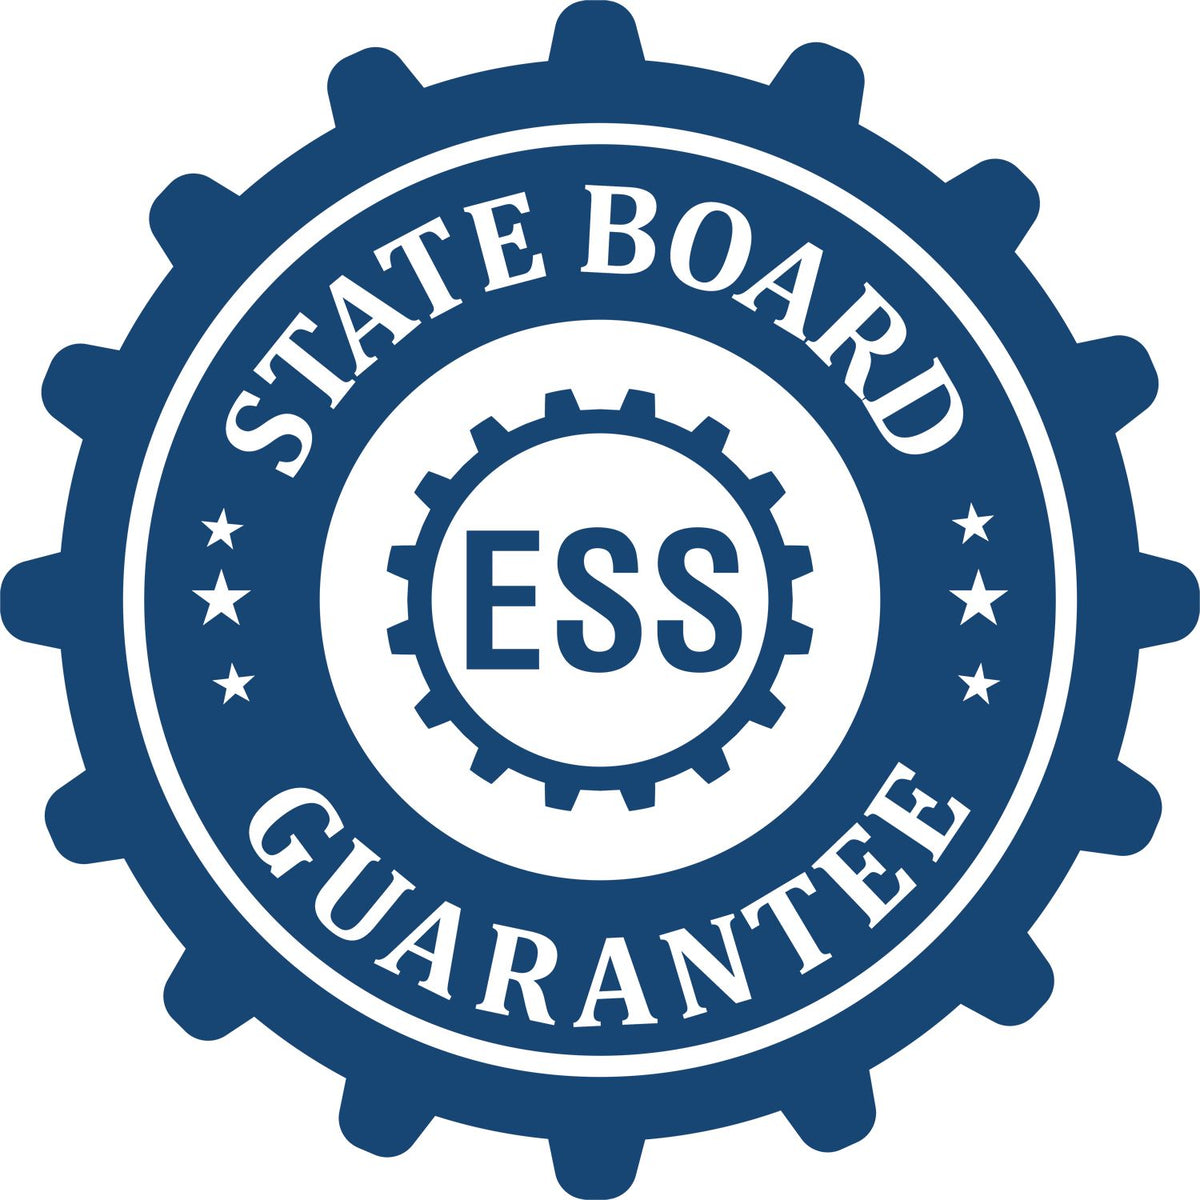 An emblem in a gear shape illustrating a state board guarantee for the Digital Connecticut Landscape Architect Stamp product.